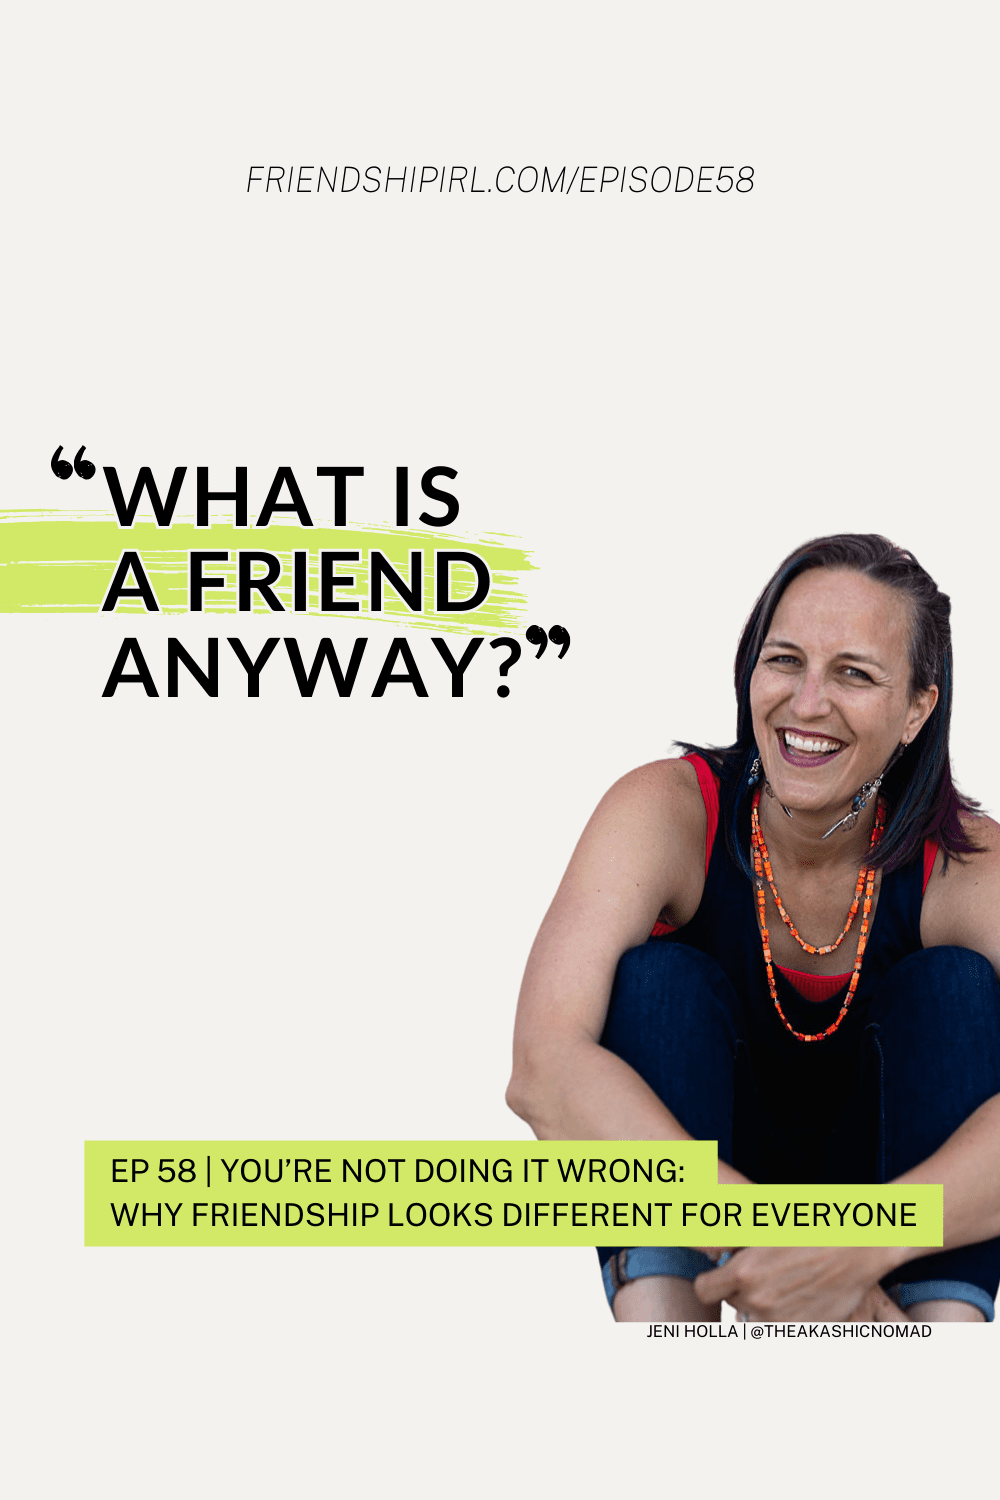 Friendship IRL Podcast - Episode 58 - You’re Not Doing It Wrong: Why Friendship Looks Different for Everyone - With Jeni Holla